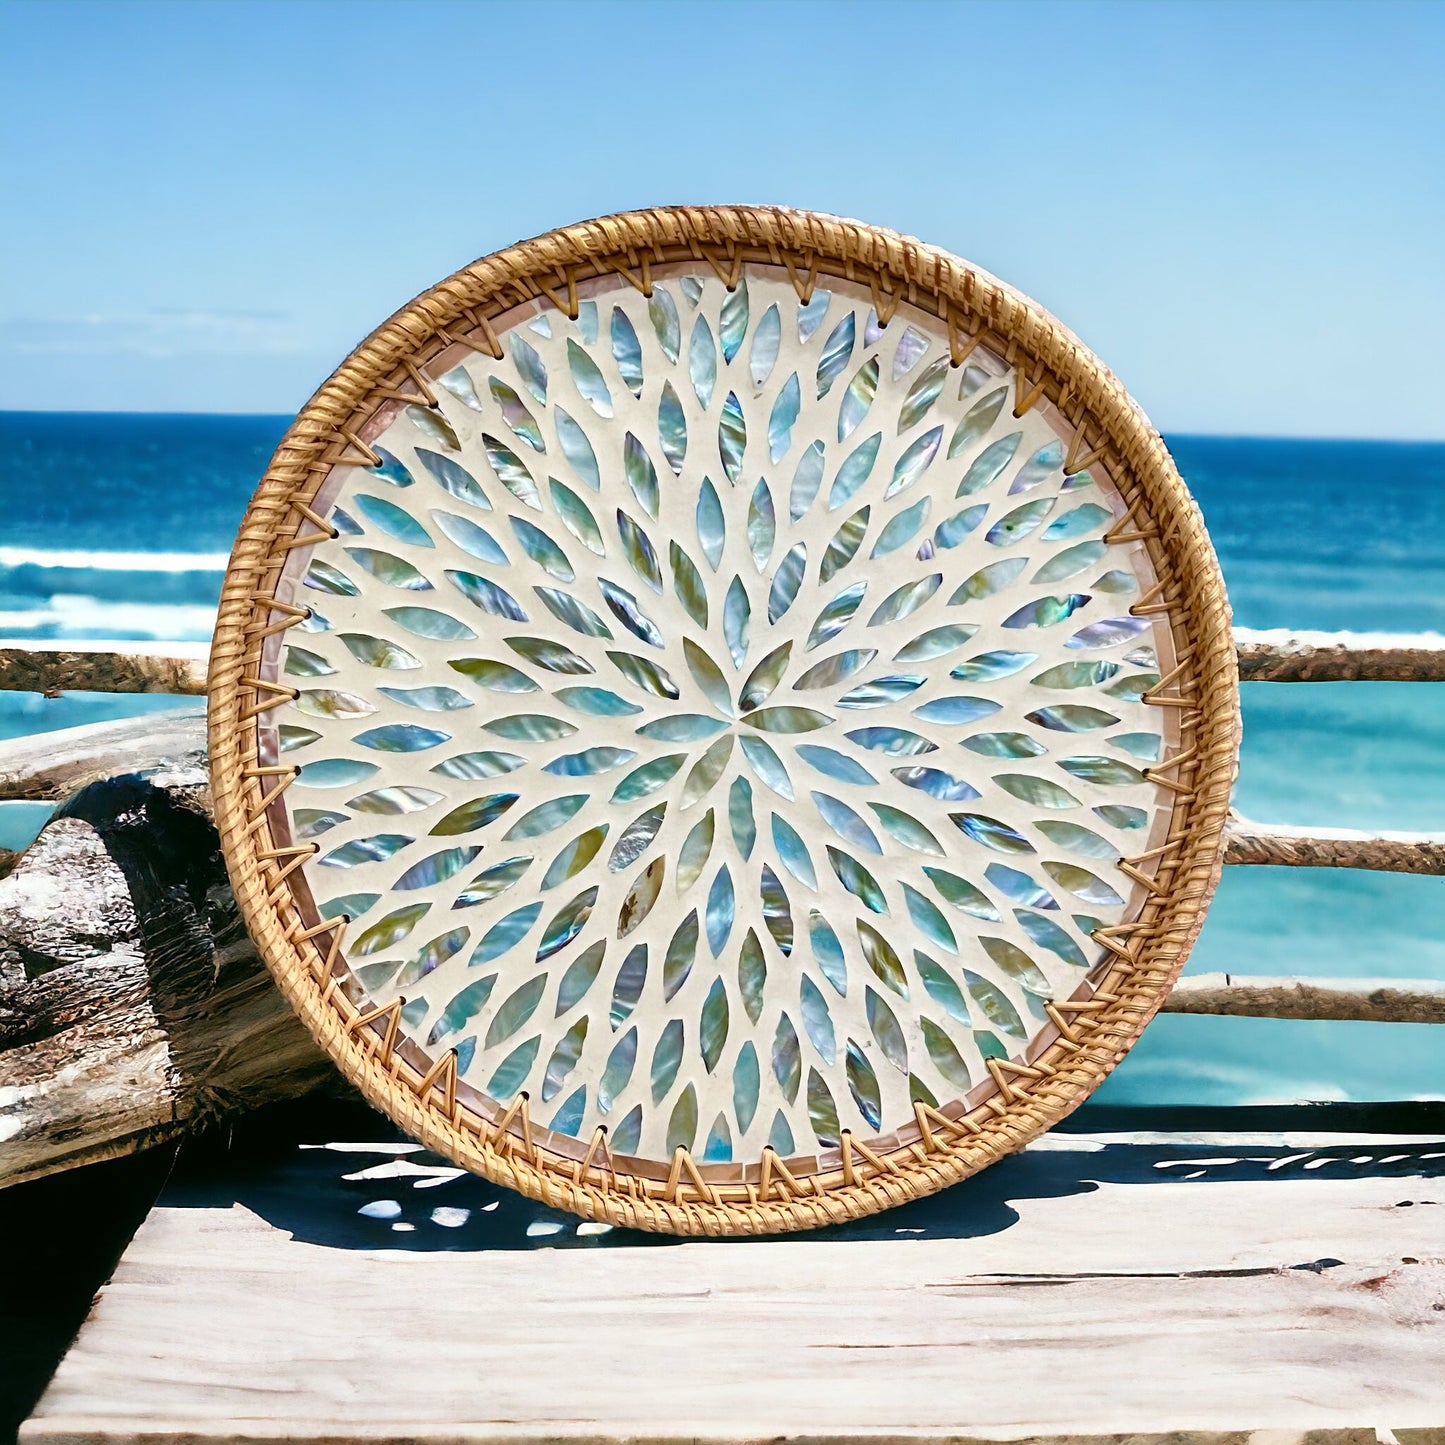 Hand-woven Rattan & Aqua flower Mother Pearl Round Decoration Serving TrayTuNaCraftCollectionSize S